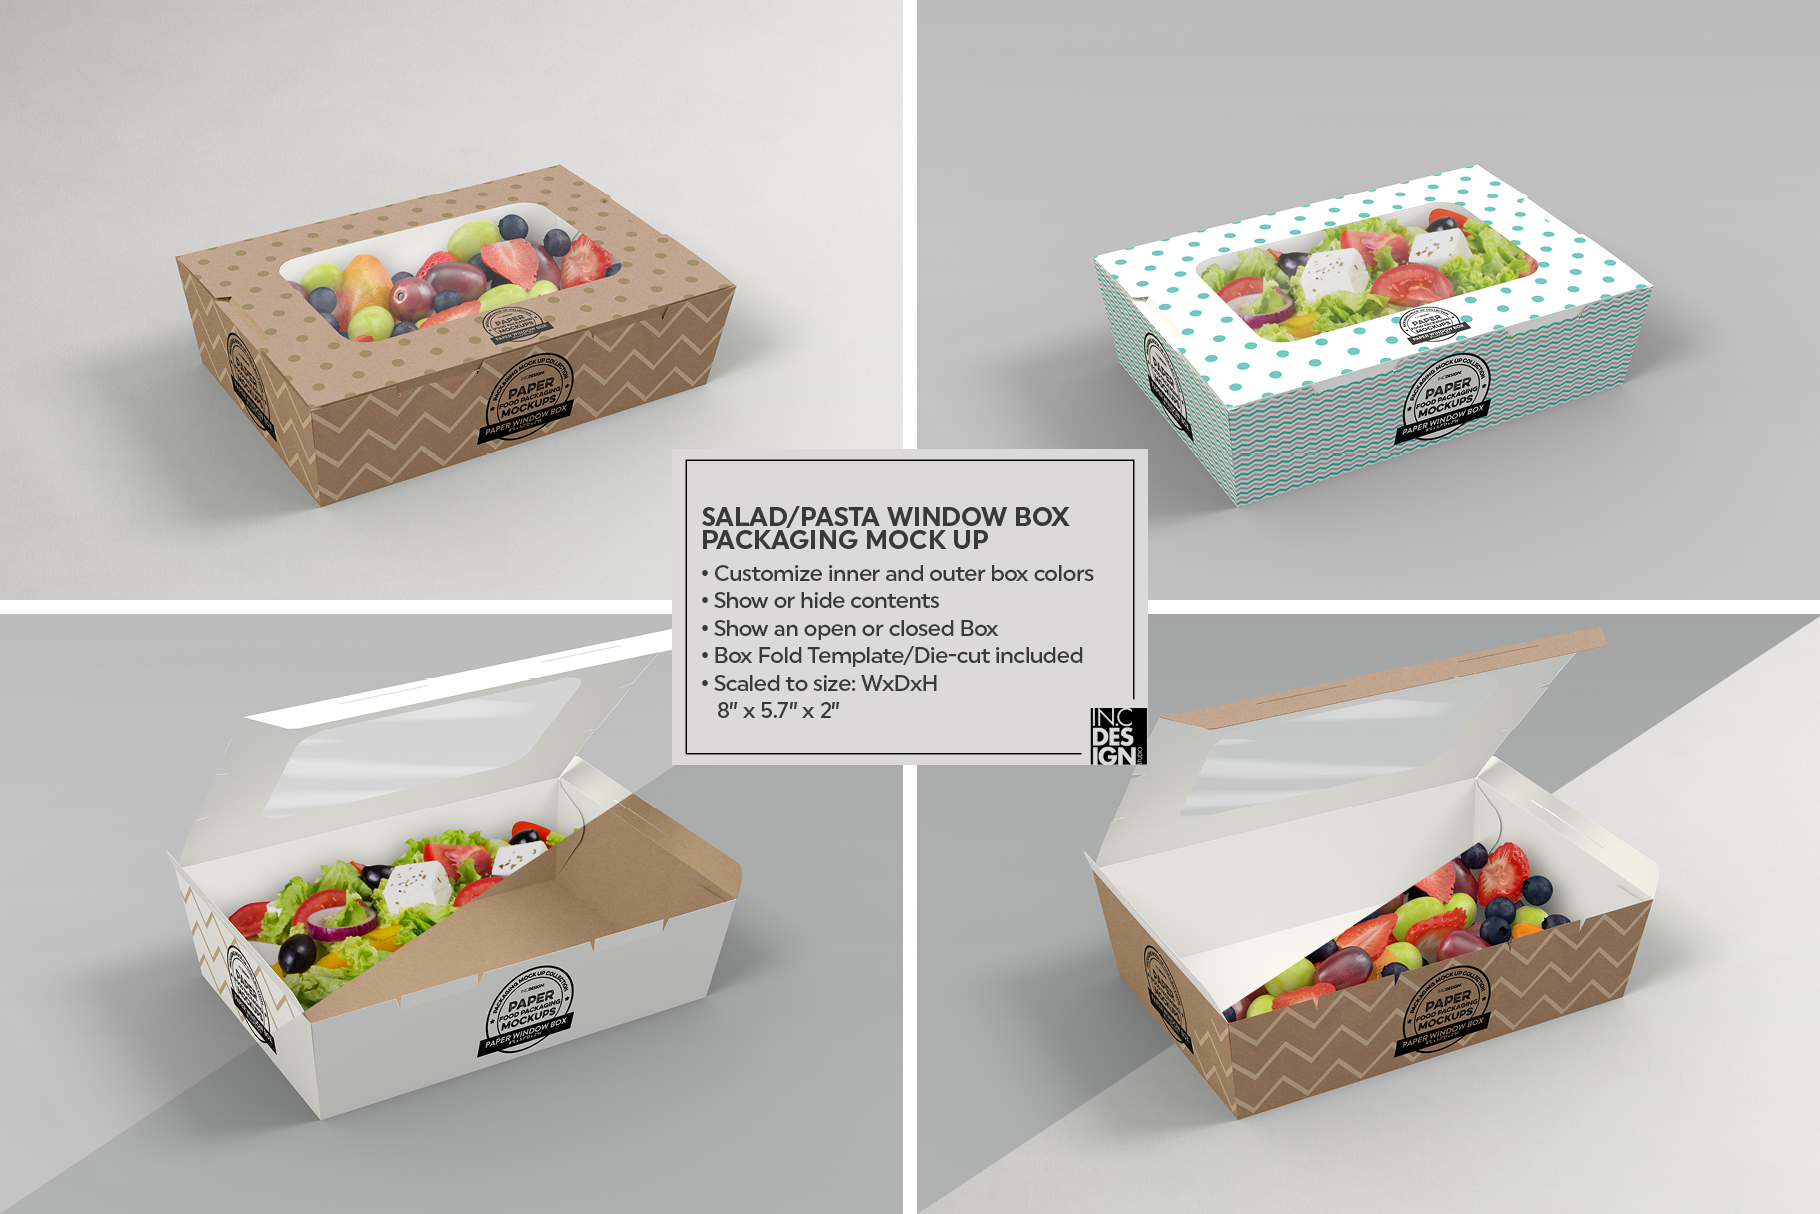 Download Mockup Packaging Food Box 20 Beautiful Mockups For Food Packaging Design This Is To Say That Packaging Is A Continuous Evolution And People Judge What They Want To A Great